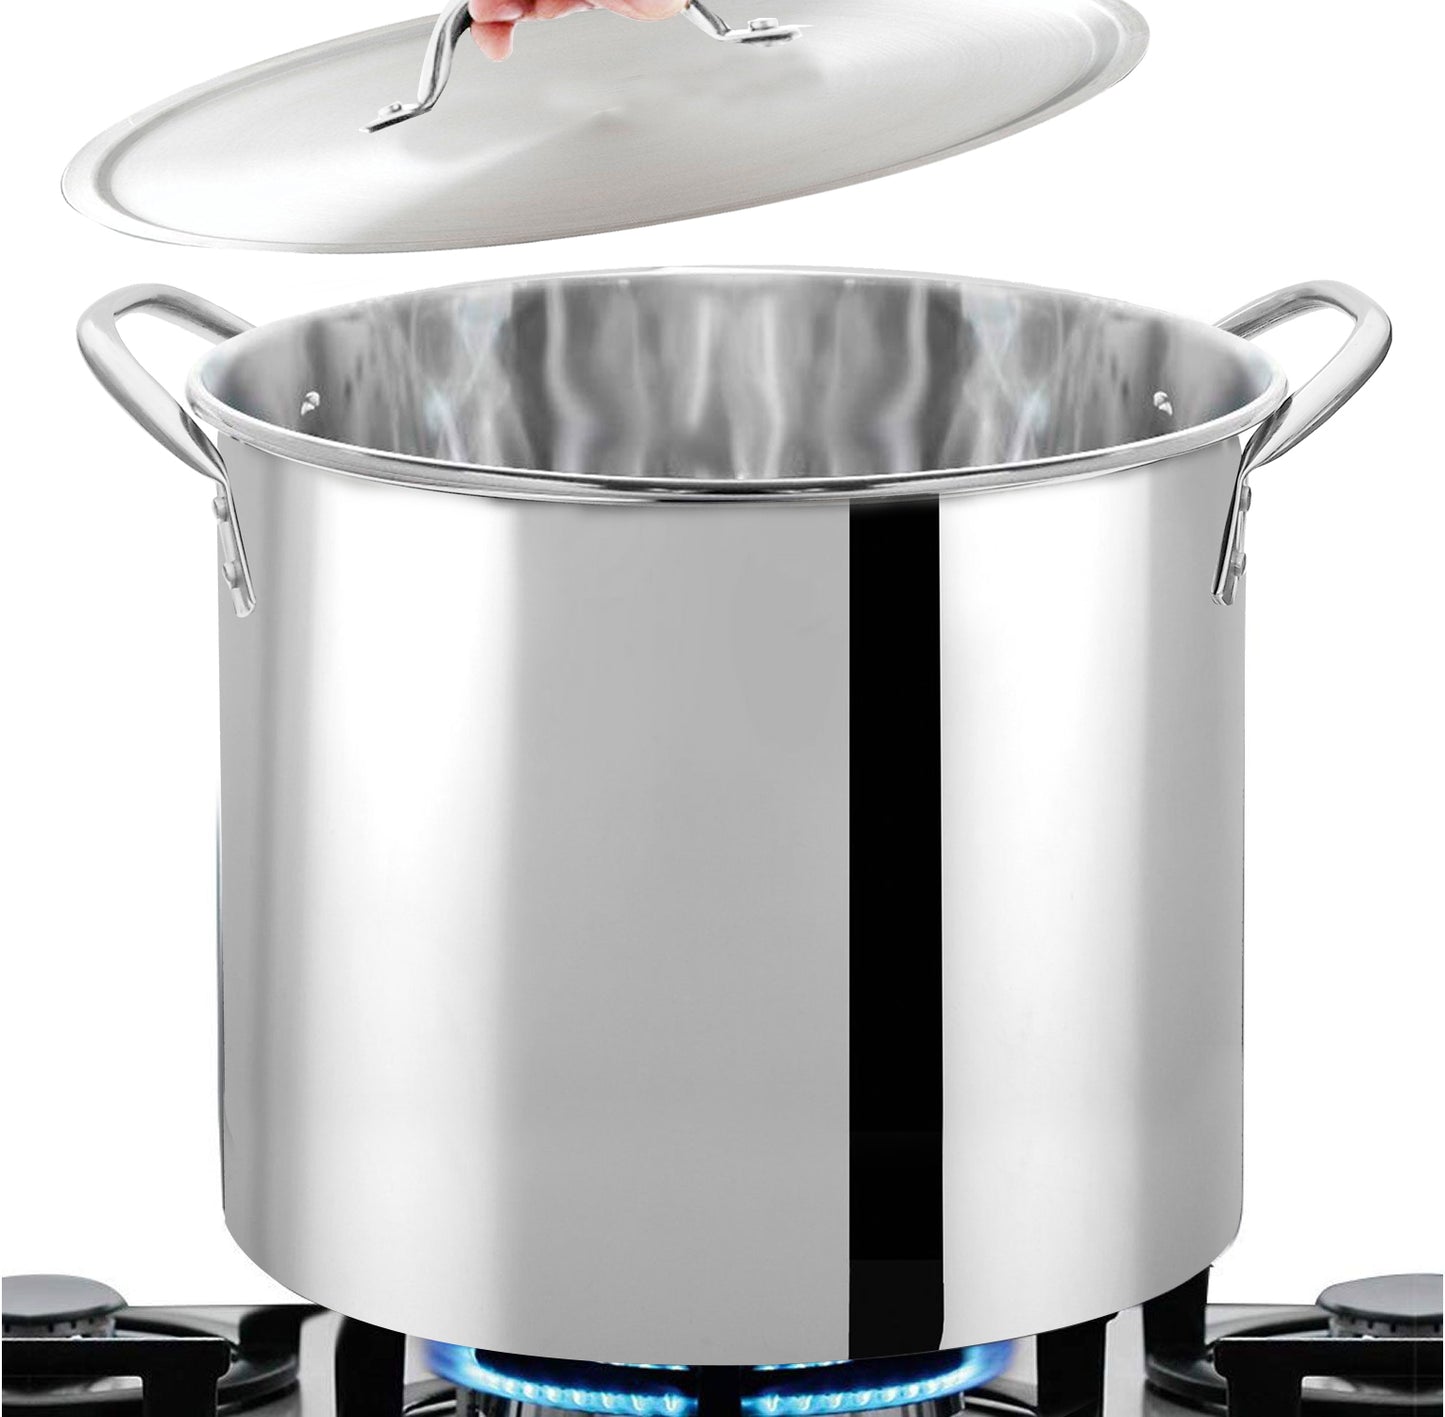 Cook N Home Sauce Pot Stainless Steel Stockpot with Glass Lid, Basic S